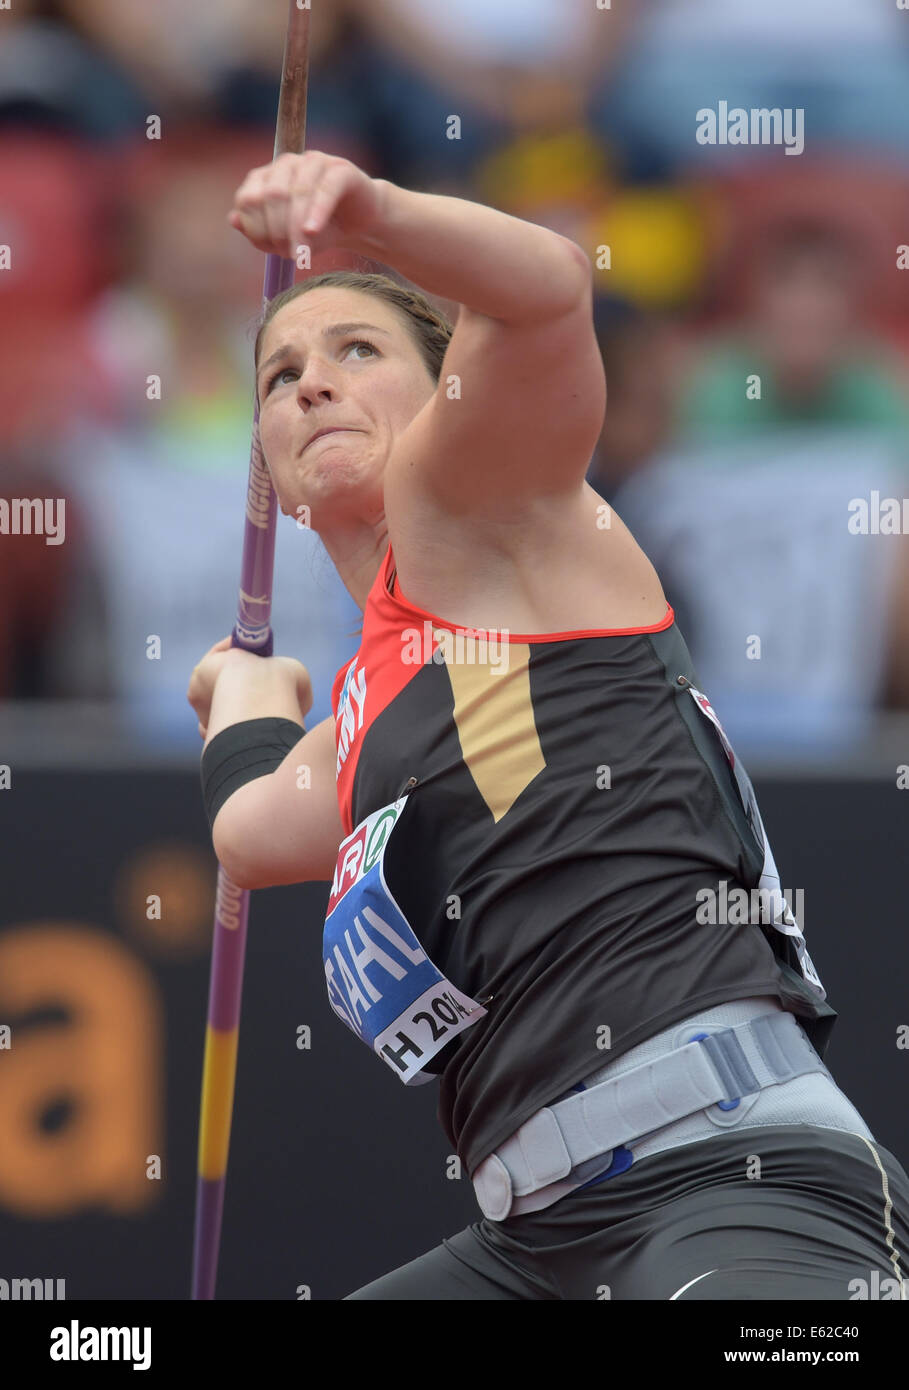 Zurich, Switzerland. 12th Aug, 2014. Linda Stahl of Germany competes in the women's Javelin qualification at the European Athletics Championships 2014 at the Letzigrund stadium in Zurich, Switzerland, 12 August 2014. Photo: Bernd Thissen/dpa/Alamy Live News Stock Photo